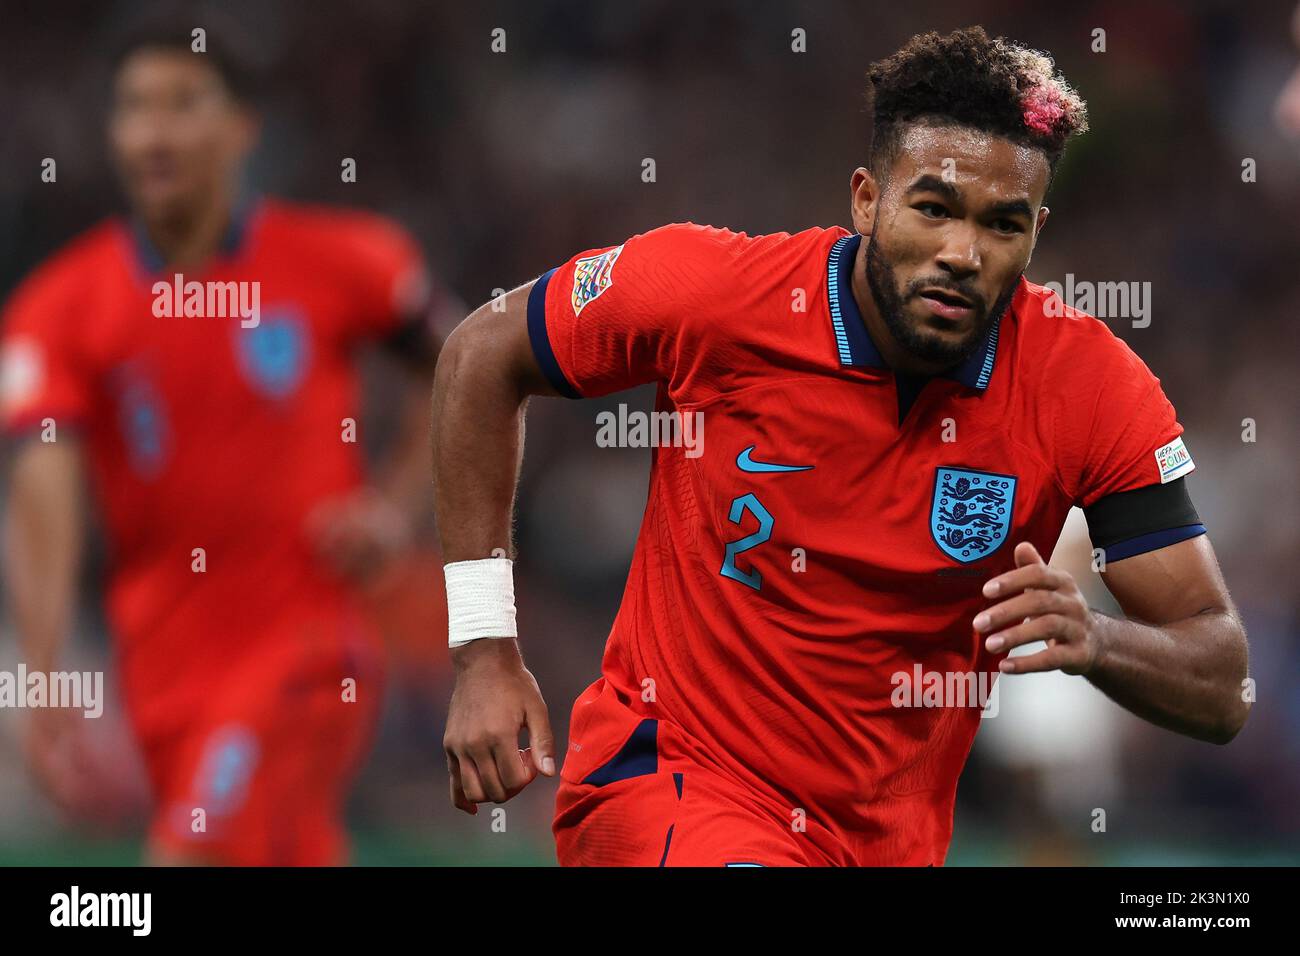 London, UK. 26th Sep, 2022. Reece James of England looks on. England v Germany, UEFA Nations league International group C match at Wembley Stadium in London on Monday 26th September 2022. Editorial use only. pic by Andrew Orchard/Andrew Orchard sports photography/Alamy Live News Credit: Andrew Orchard sports photography/Alamy Live News Stock Photo